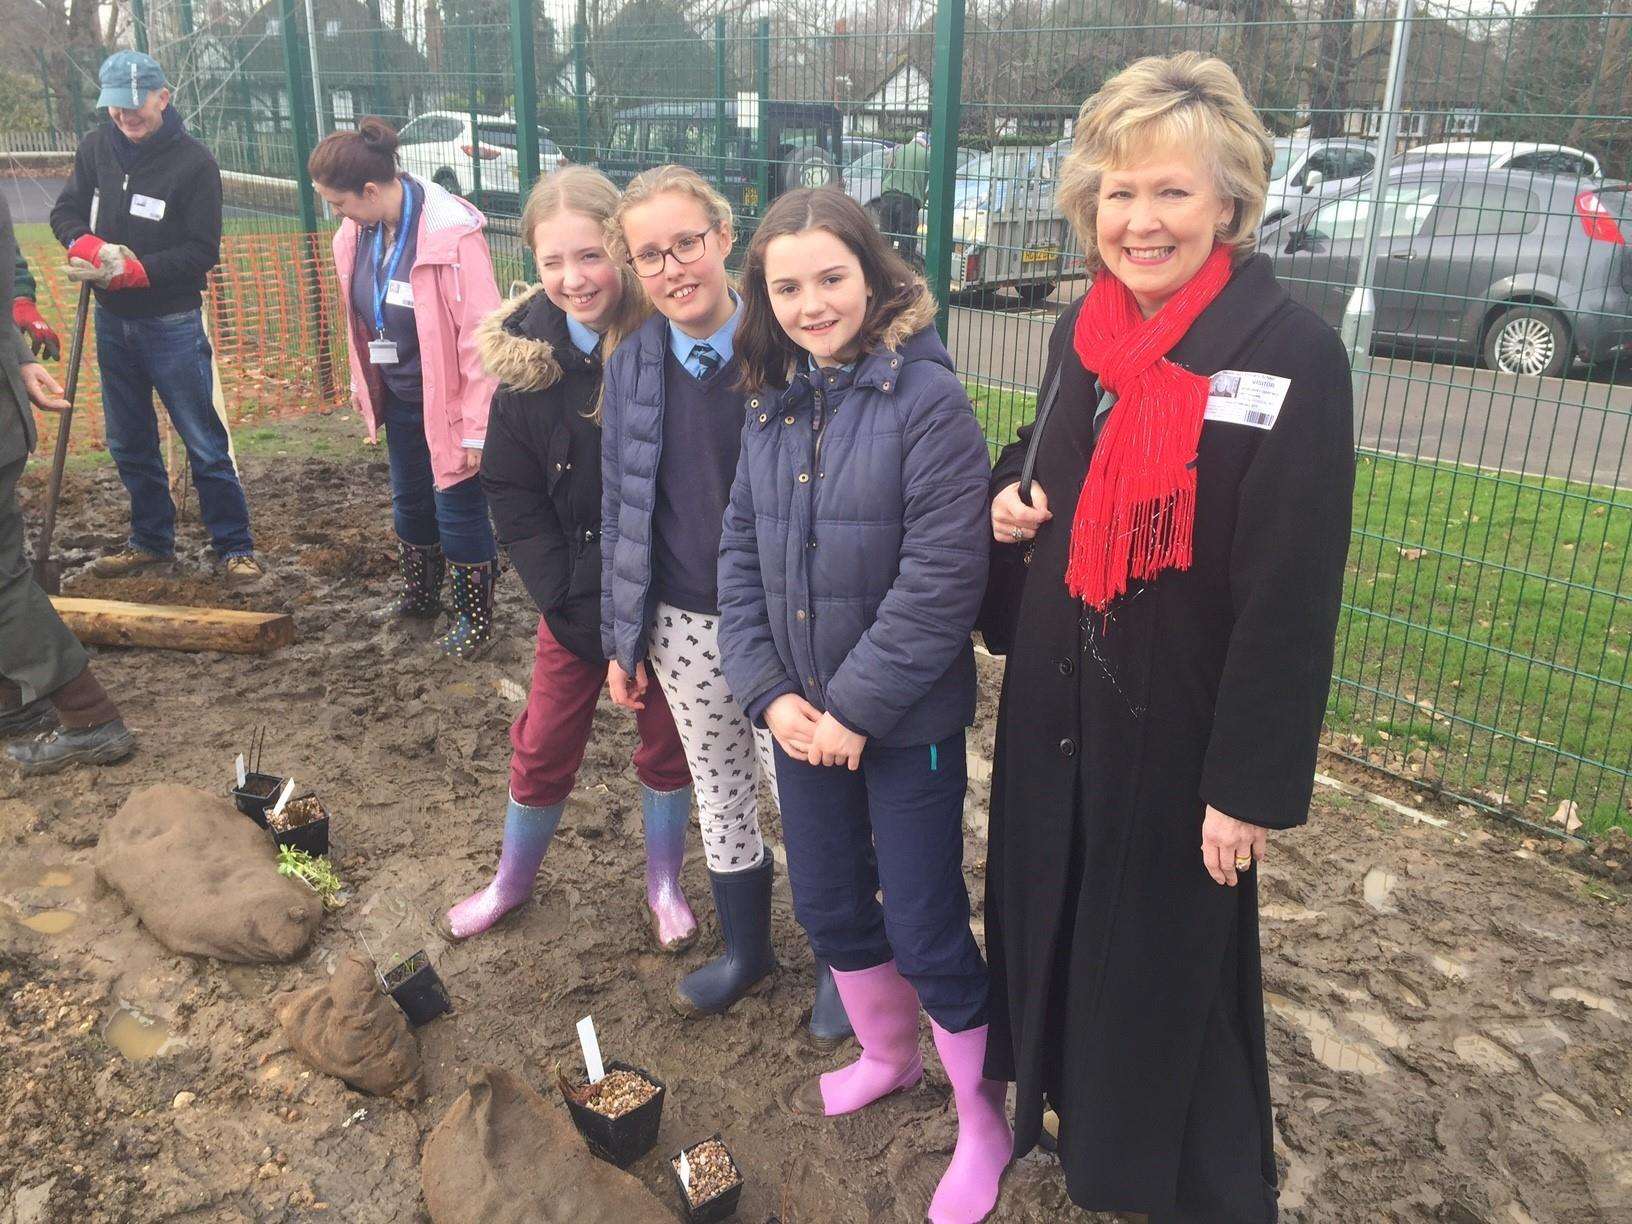 Planting up the muddy site with Cllr Margaret Crabtree